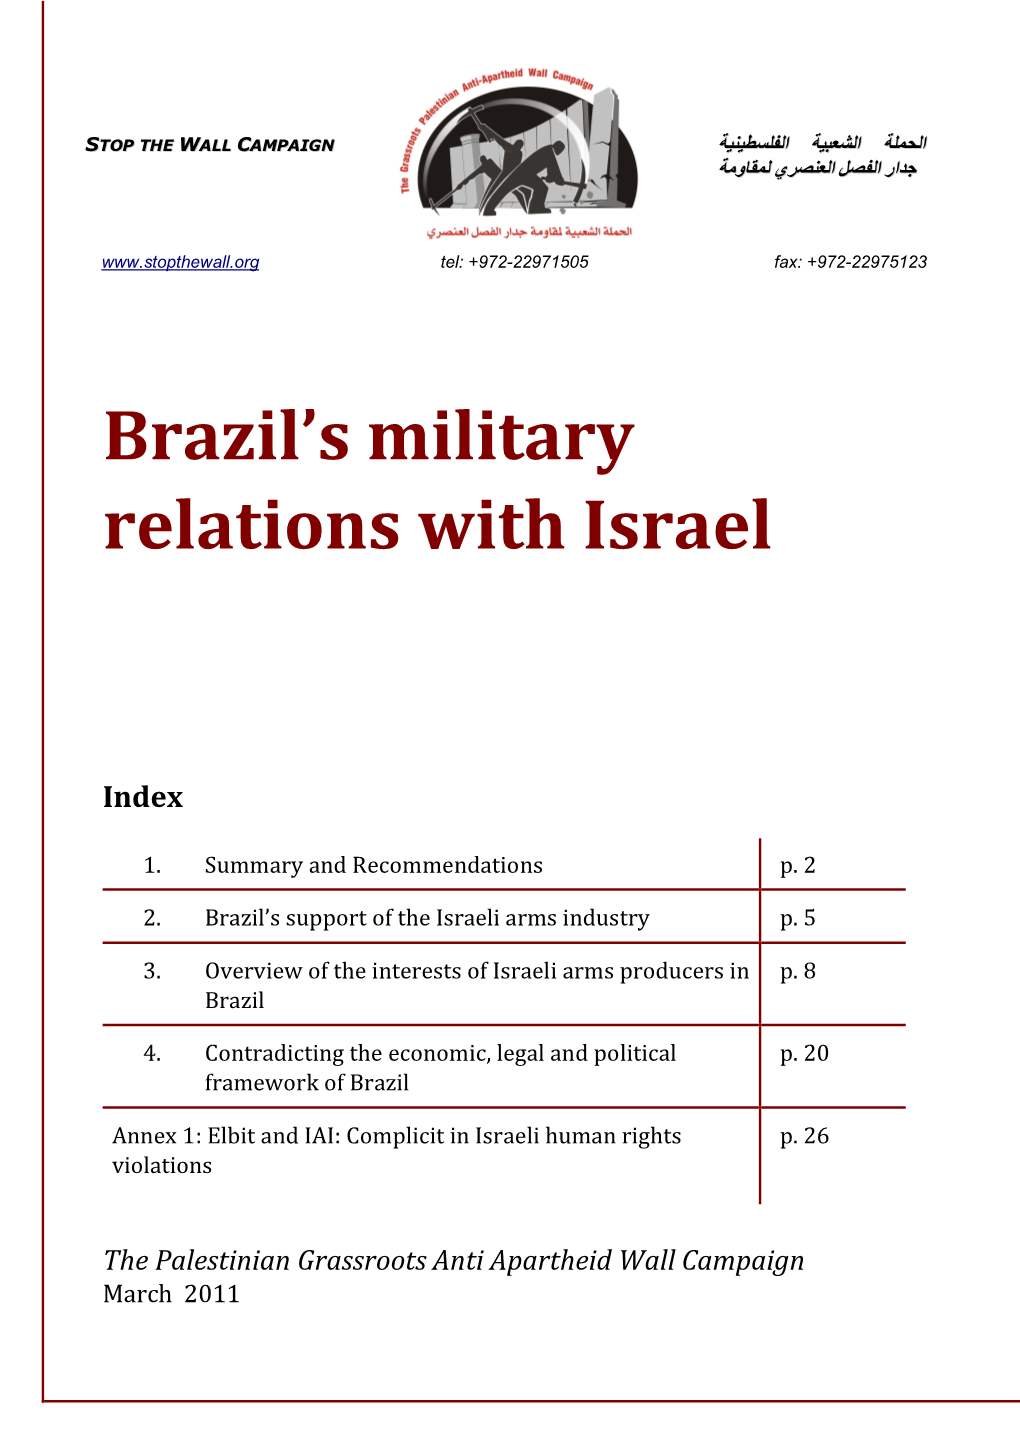 Brazil's Military Relations with Israel